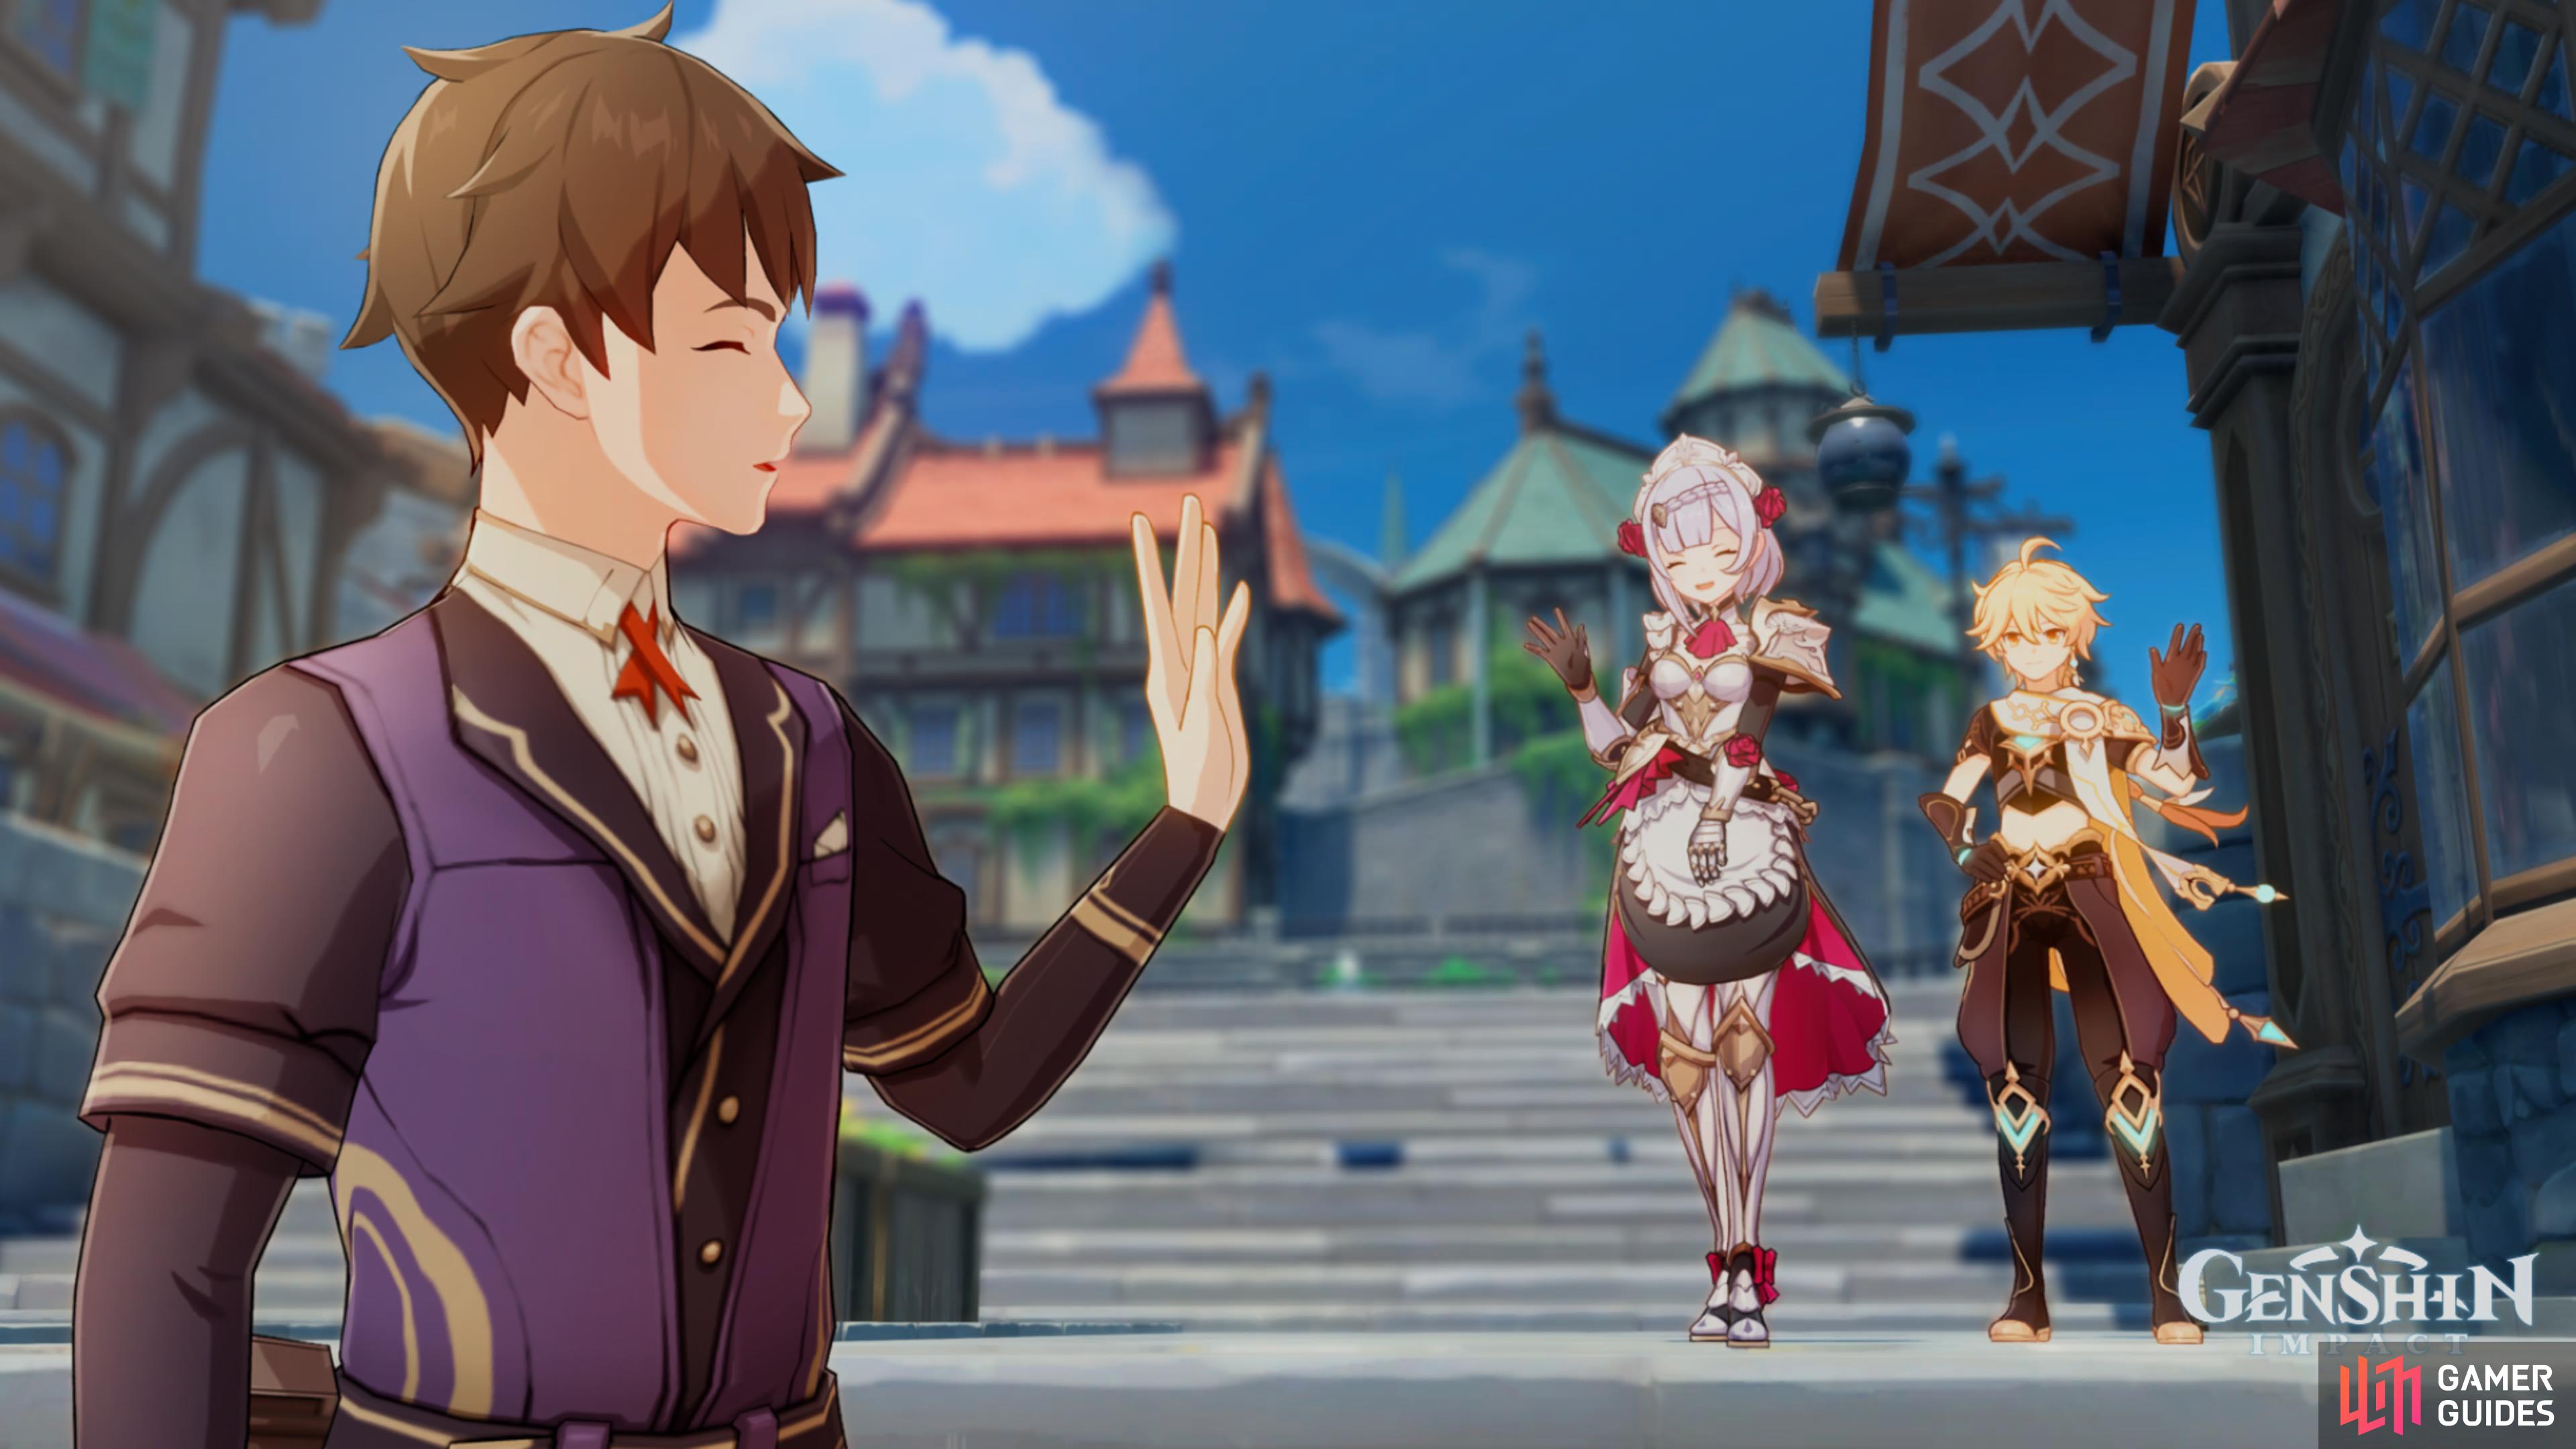 Noelle and the Traveler waving goodbye to Alois.